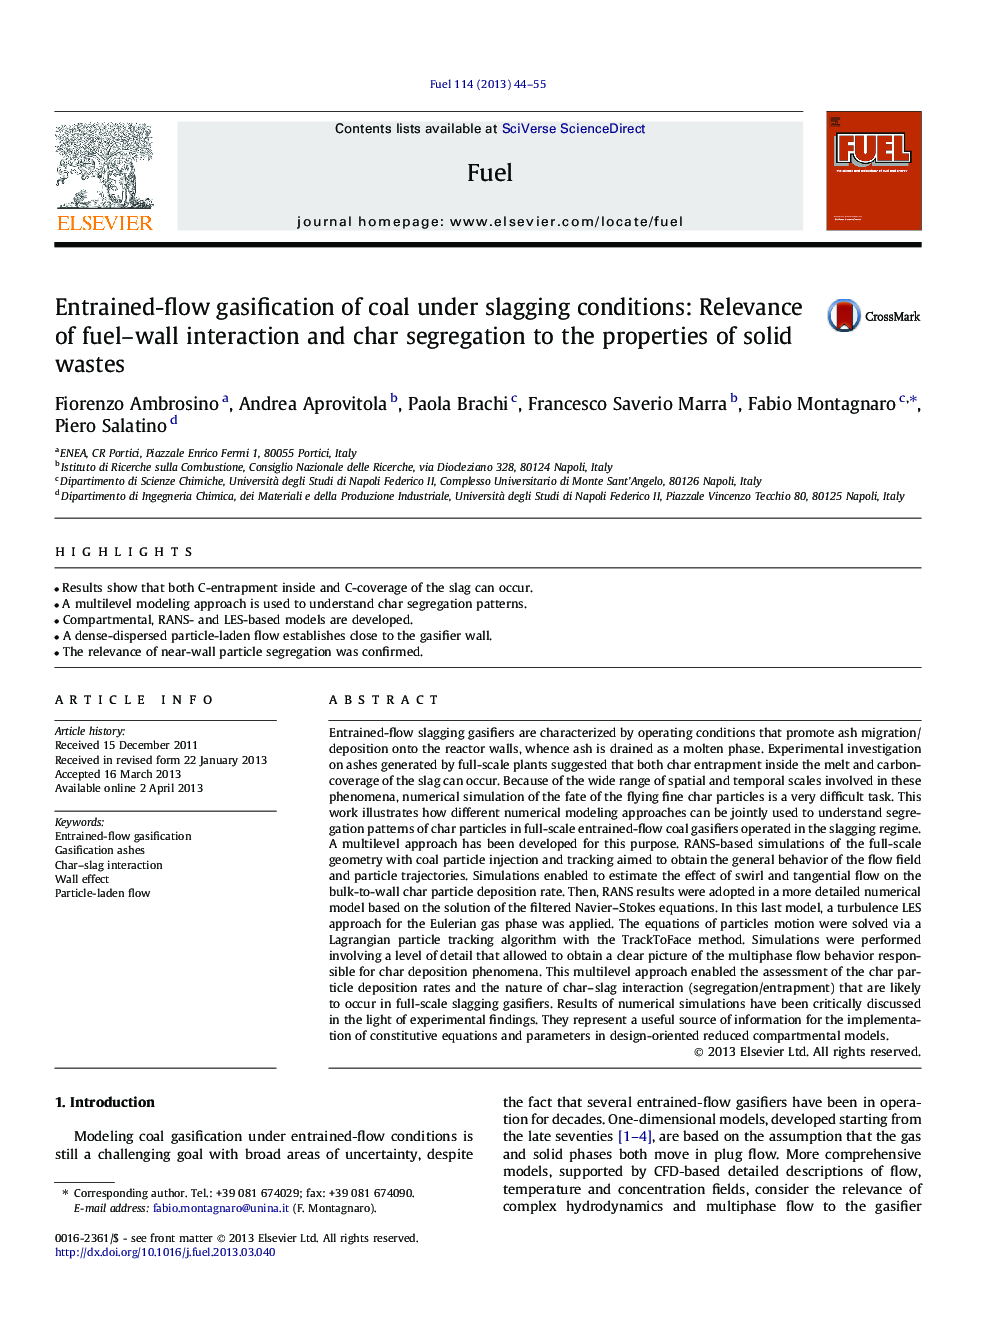 Entrained-flow gasification of coal under slagging conditions: Relevance of fuel–wall interaction and char segregation to the properties of solid wastes